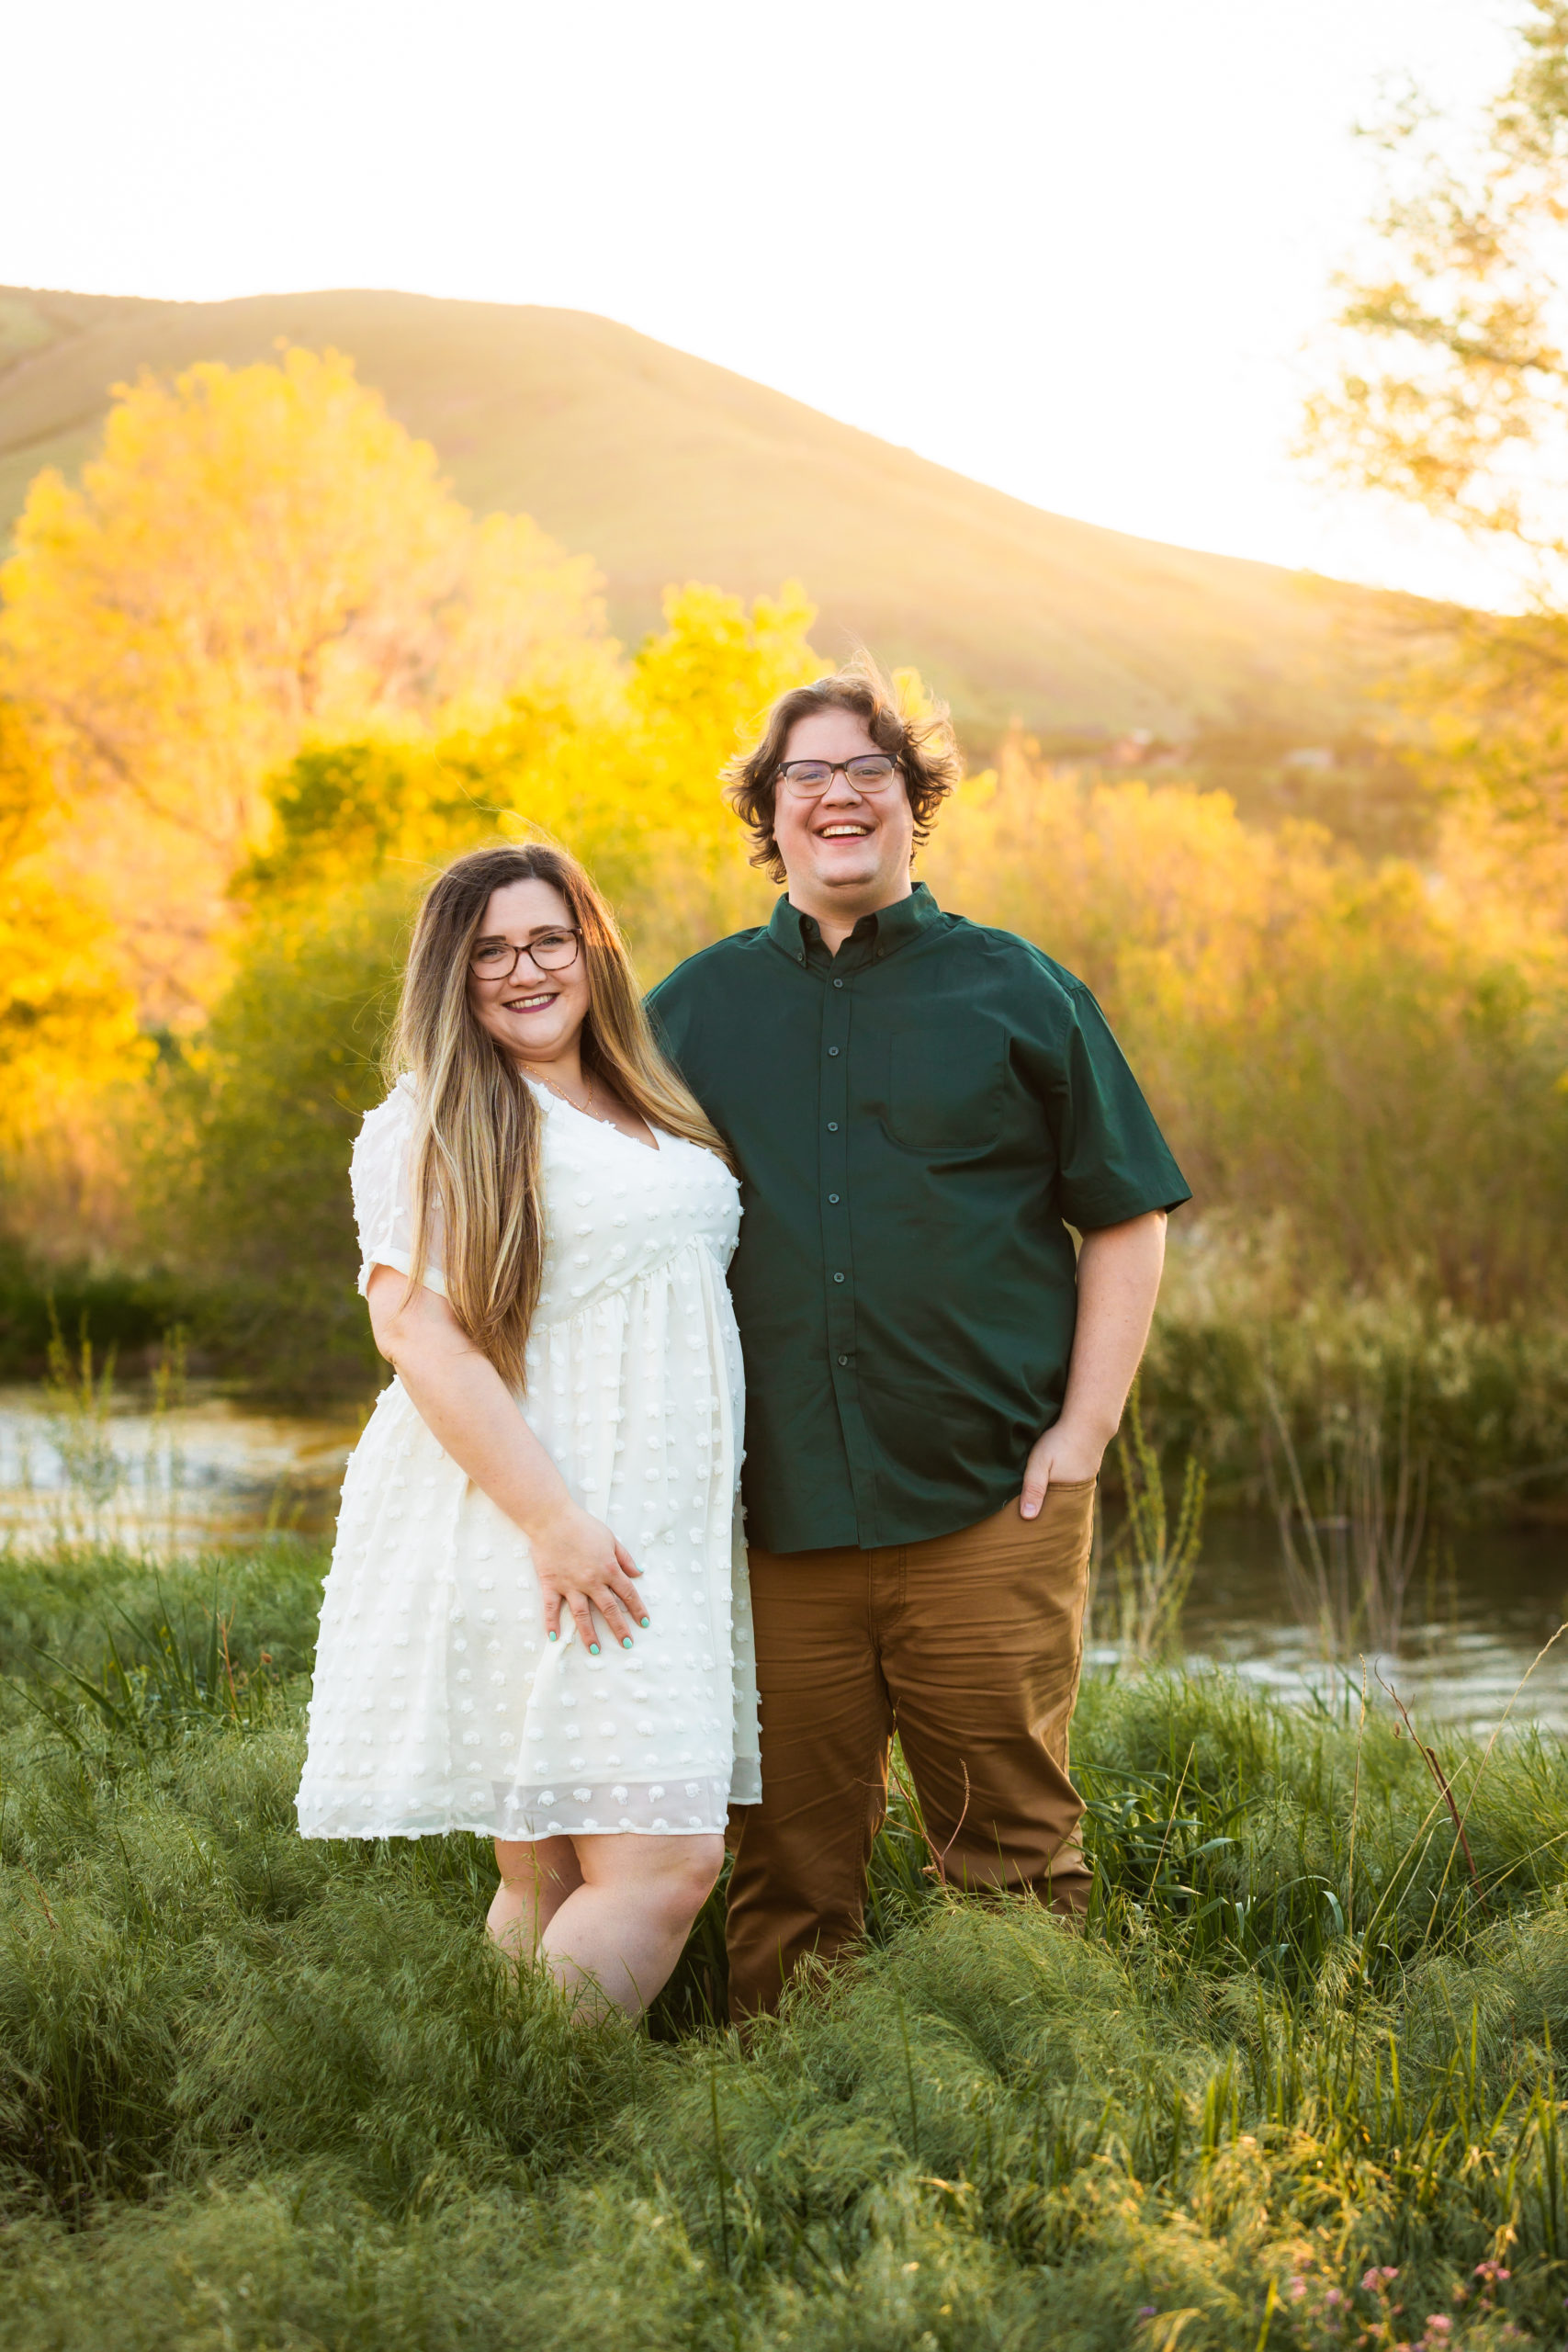 woman with long brown hair wearing white dress smiling during pocatello engagements with man wearing olive green shirt